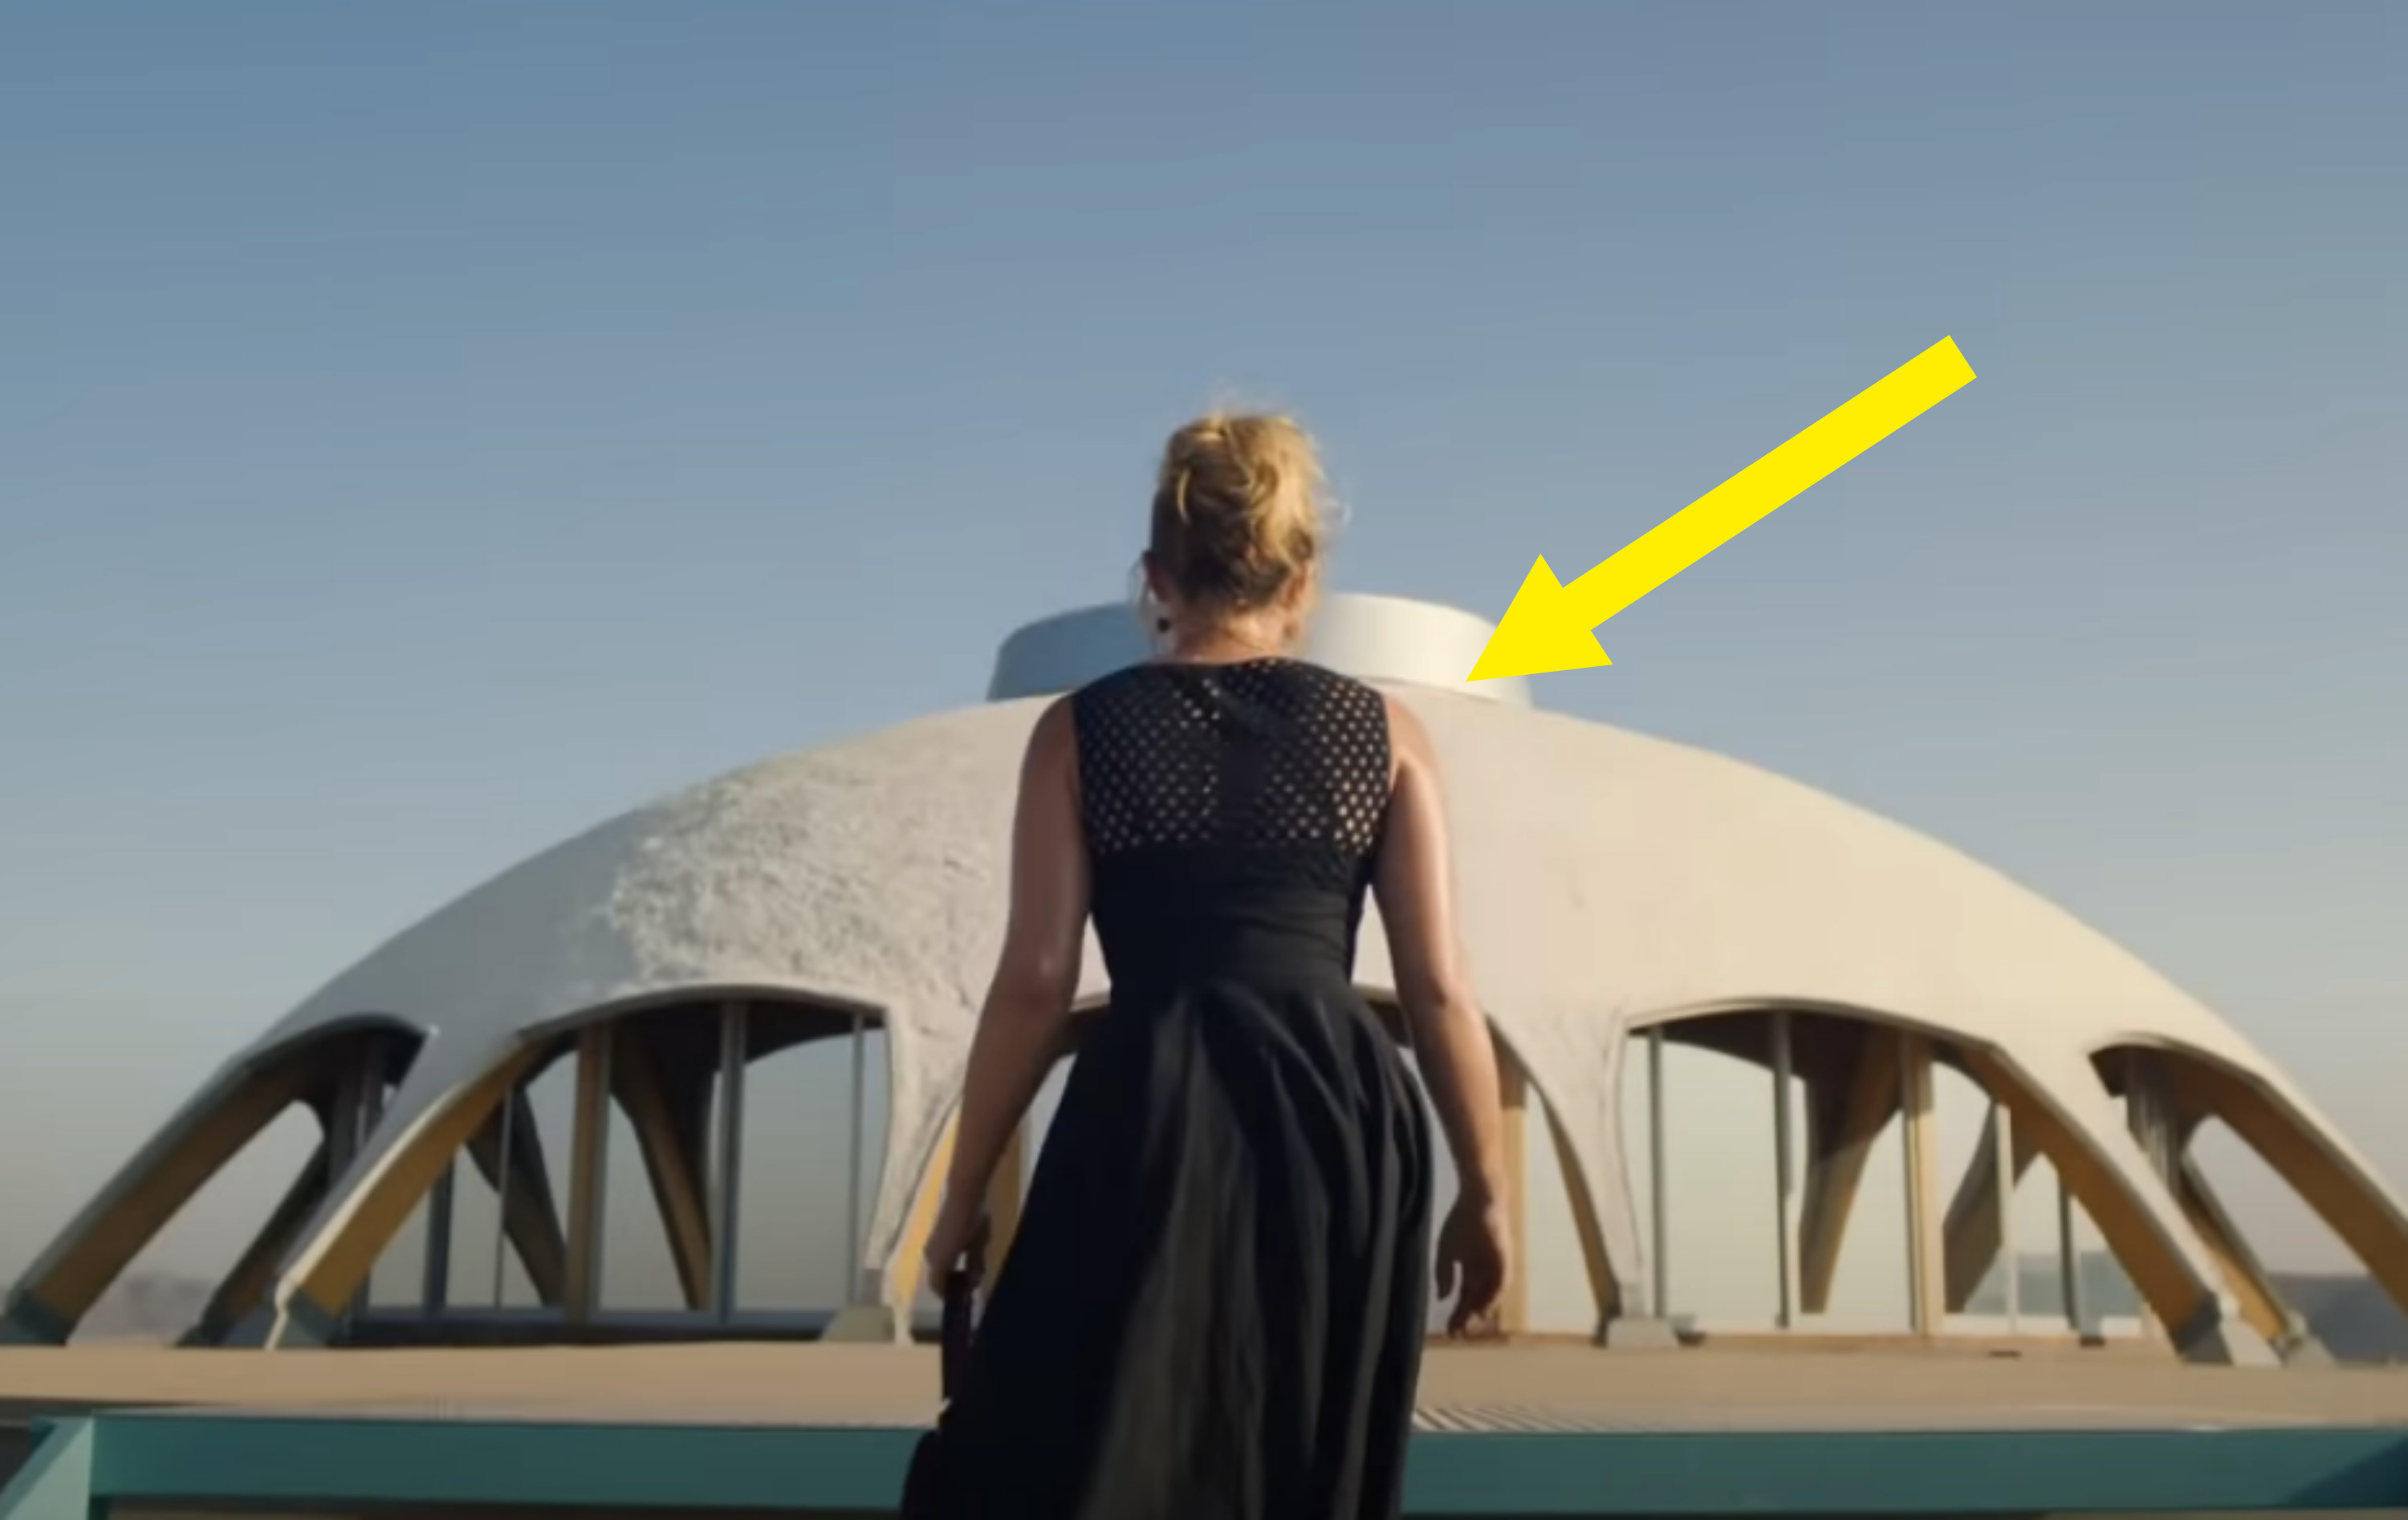 Alice wearing a simple, dark-colored dress and she walks toward a domed structure